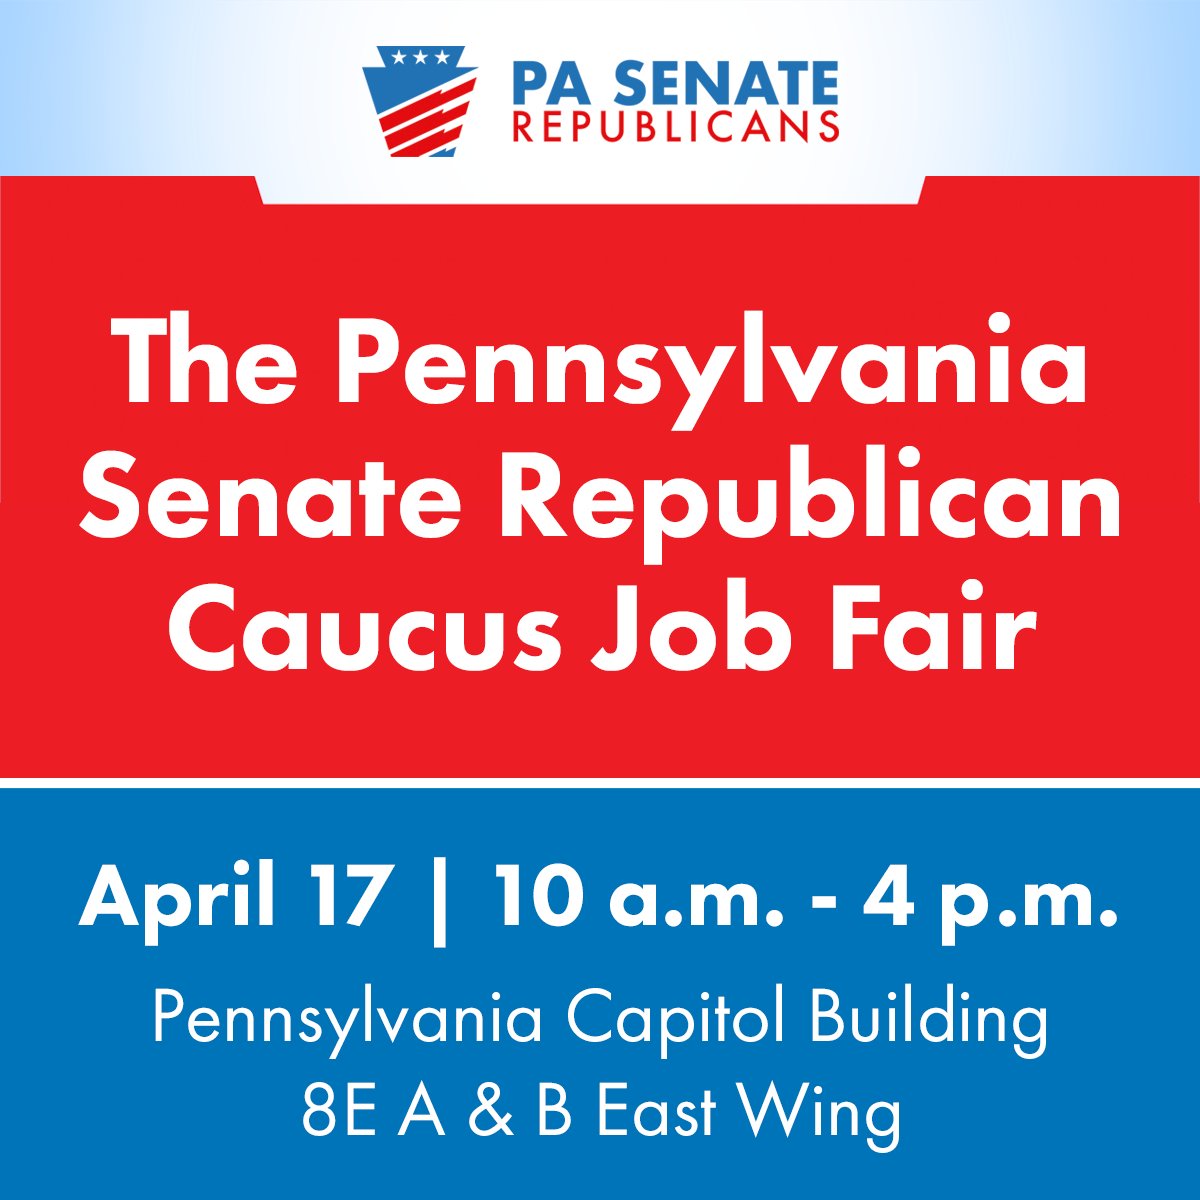 Come join @PASenateGOP! Exciting career opportunities exist for students who major in Communications, Marketing, English, Public Administration, Political Science, IT, Video Production, and more. Register here: bit.ly/4cVQ6sN